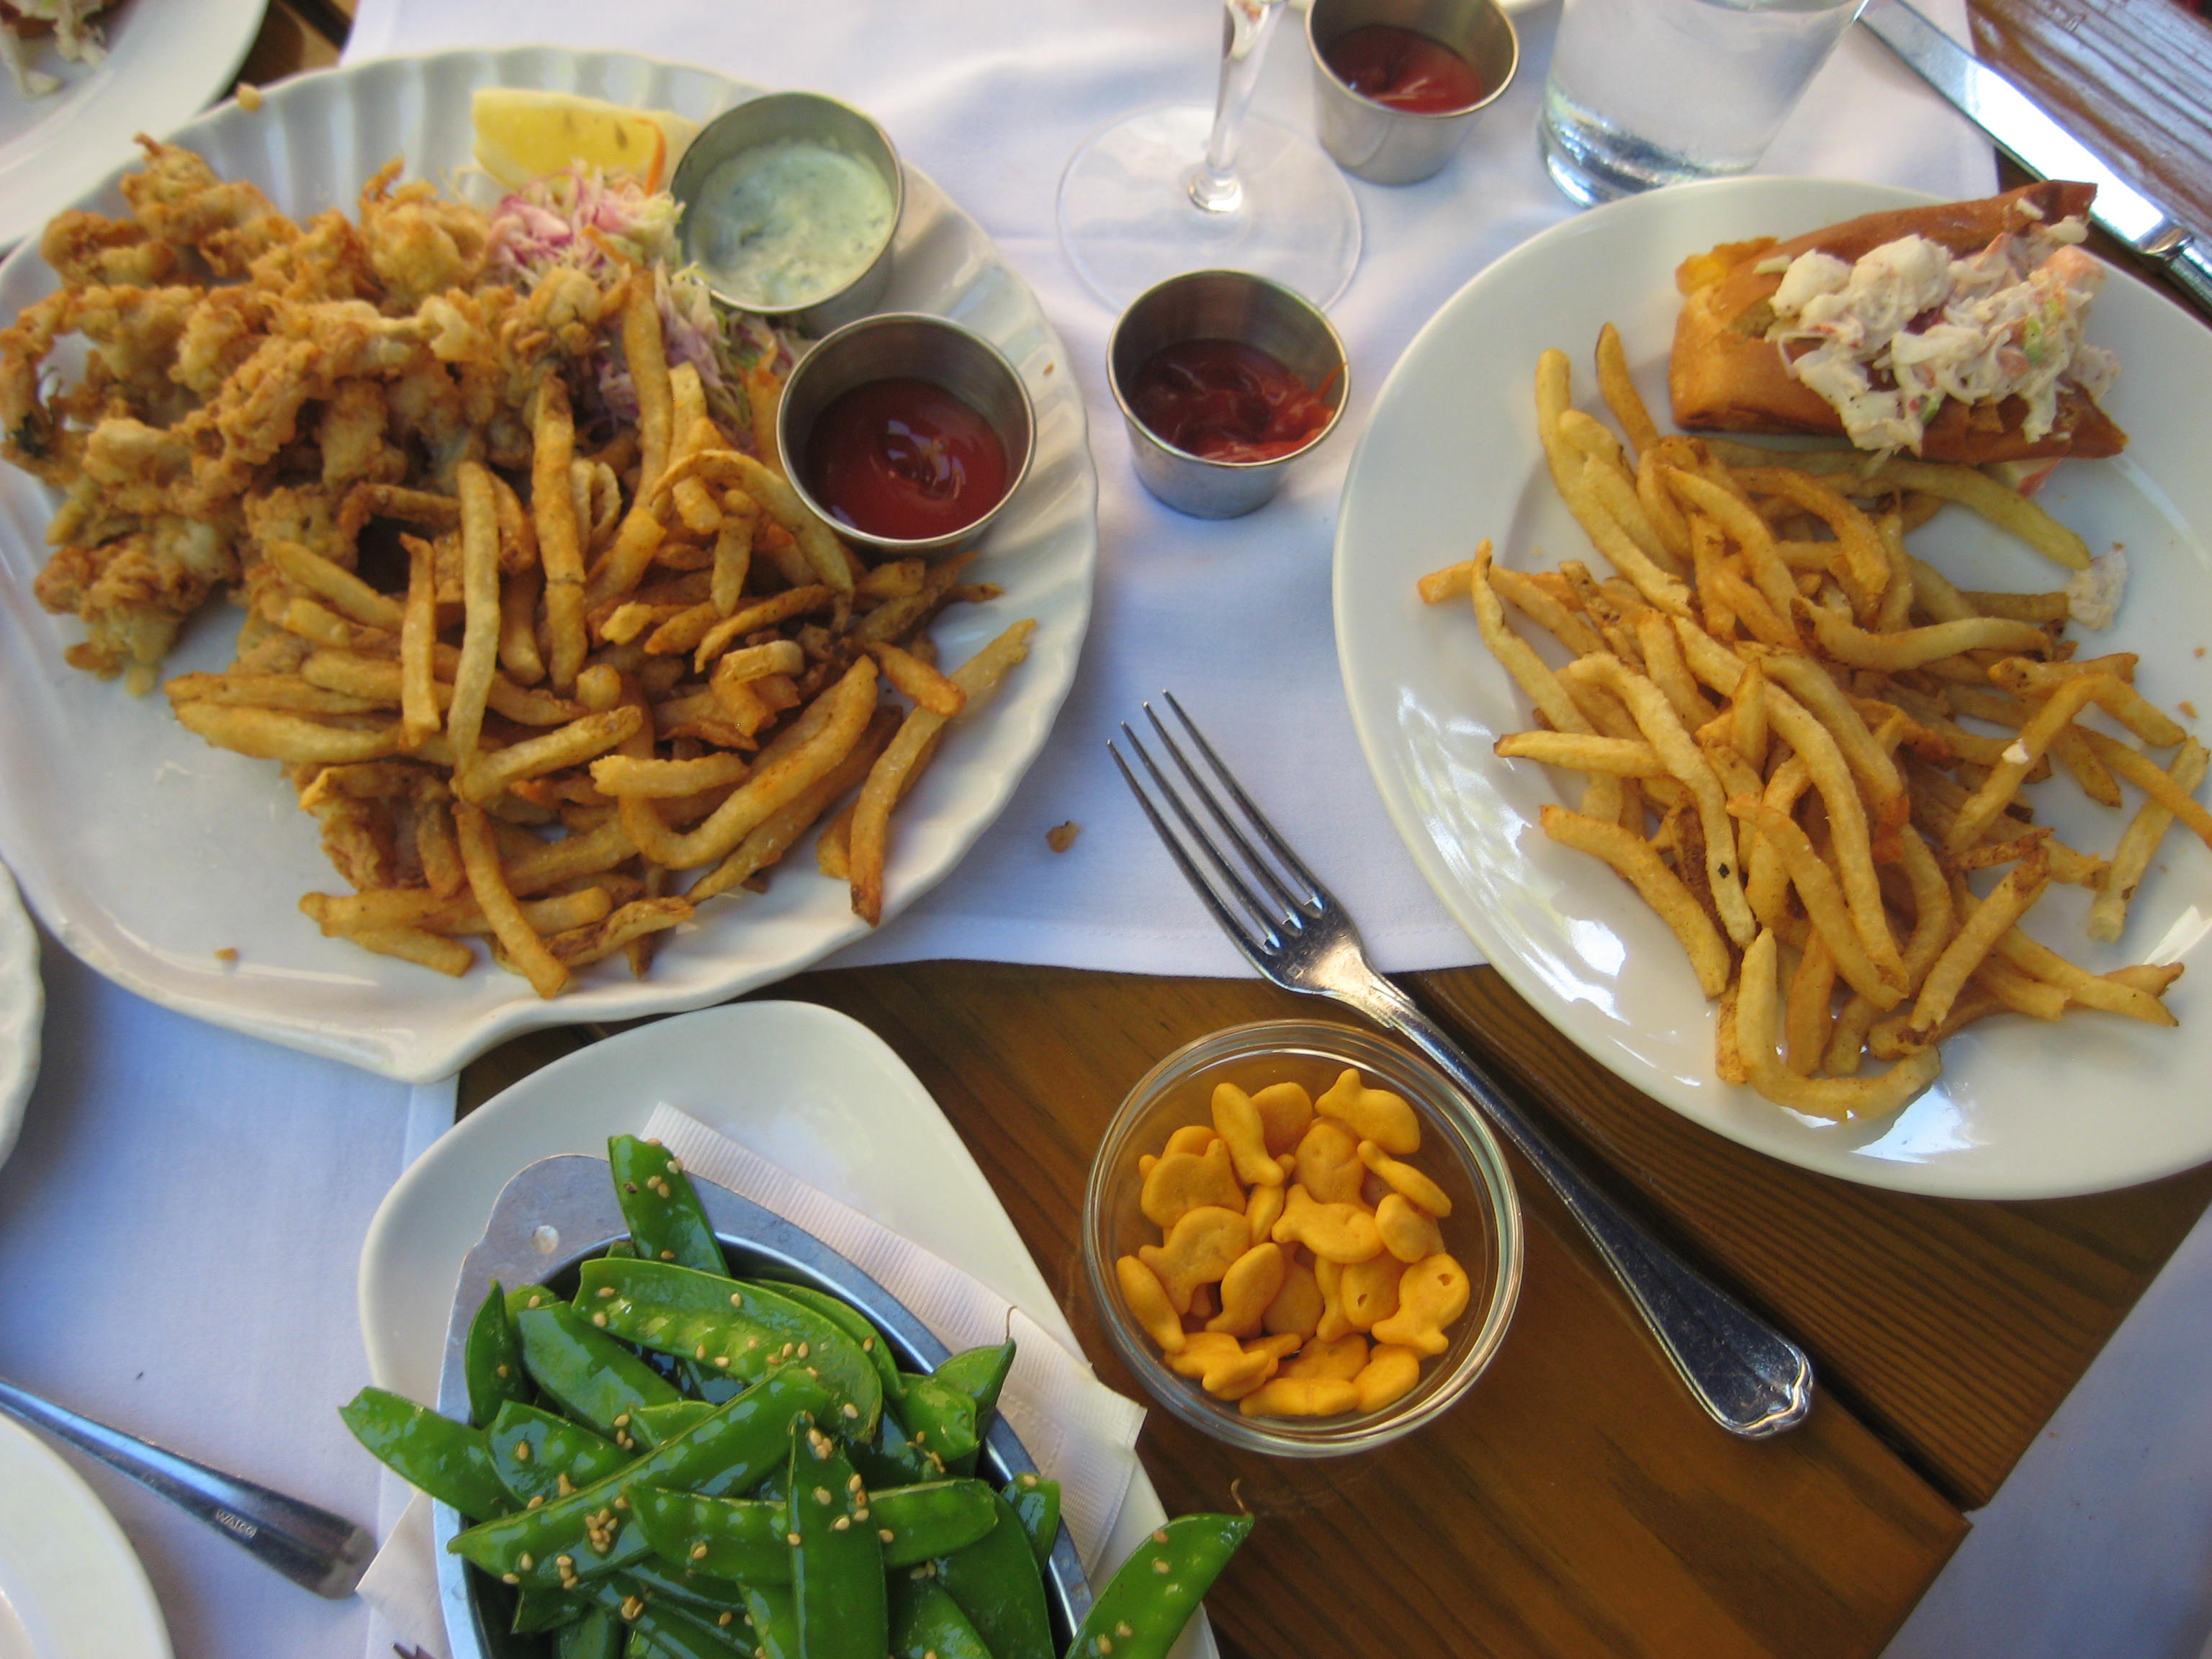 Fried clams, lobster roll, french fries, pea pods